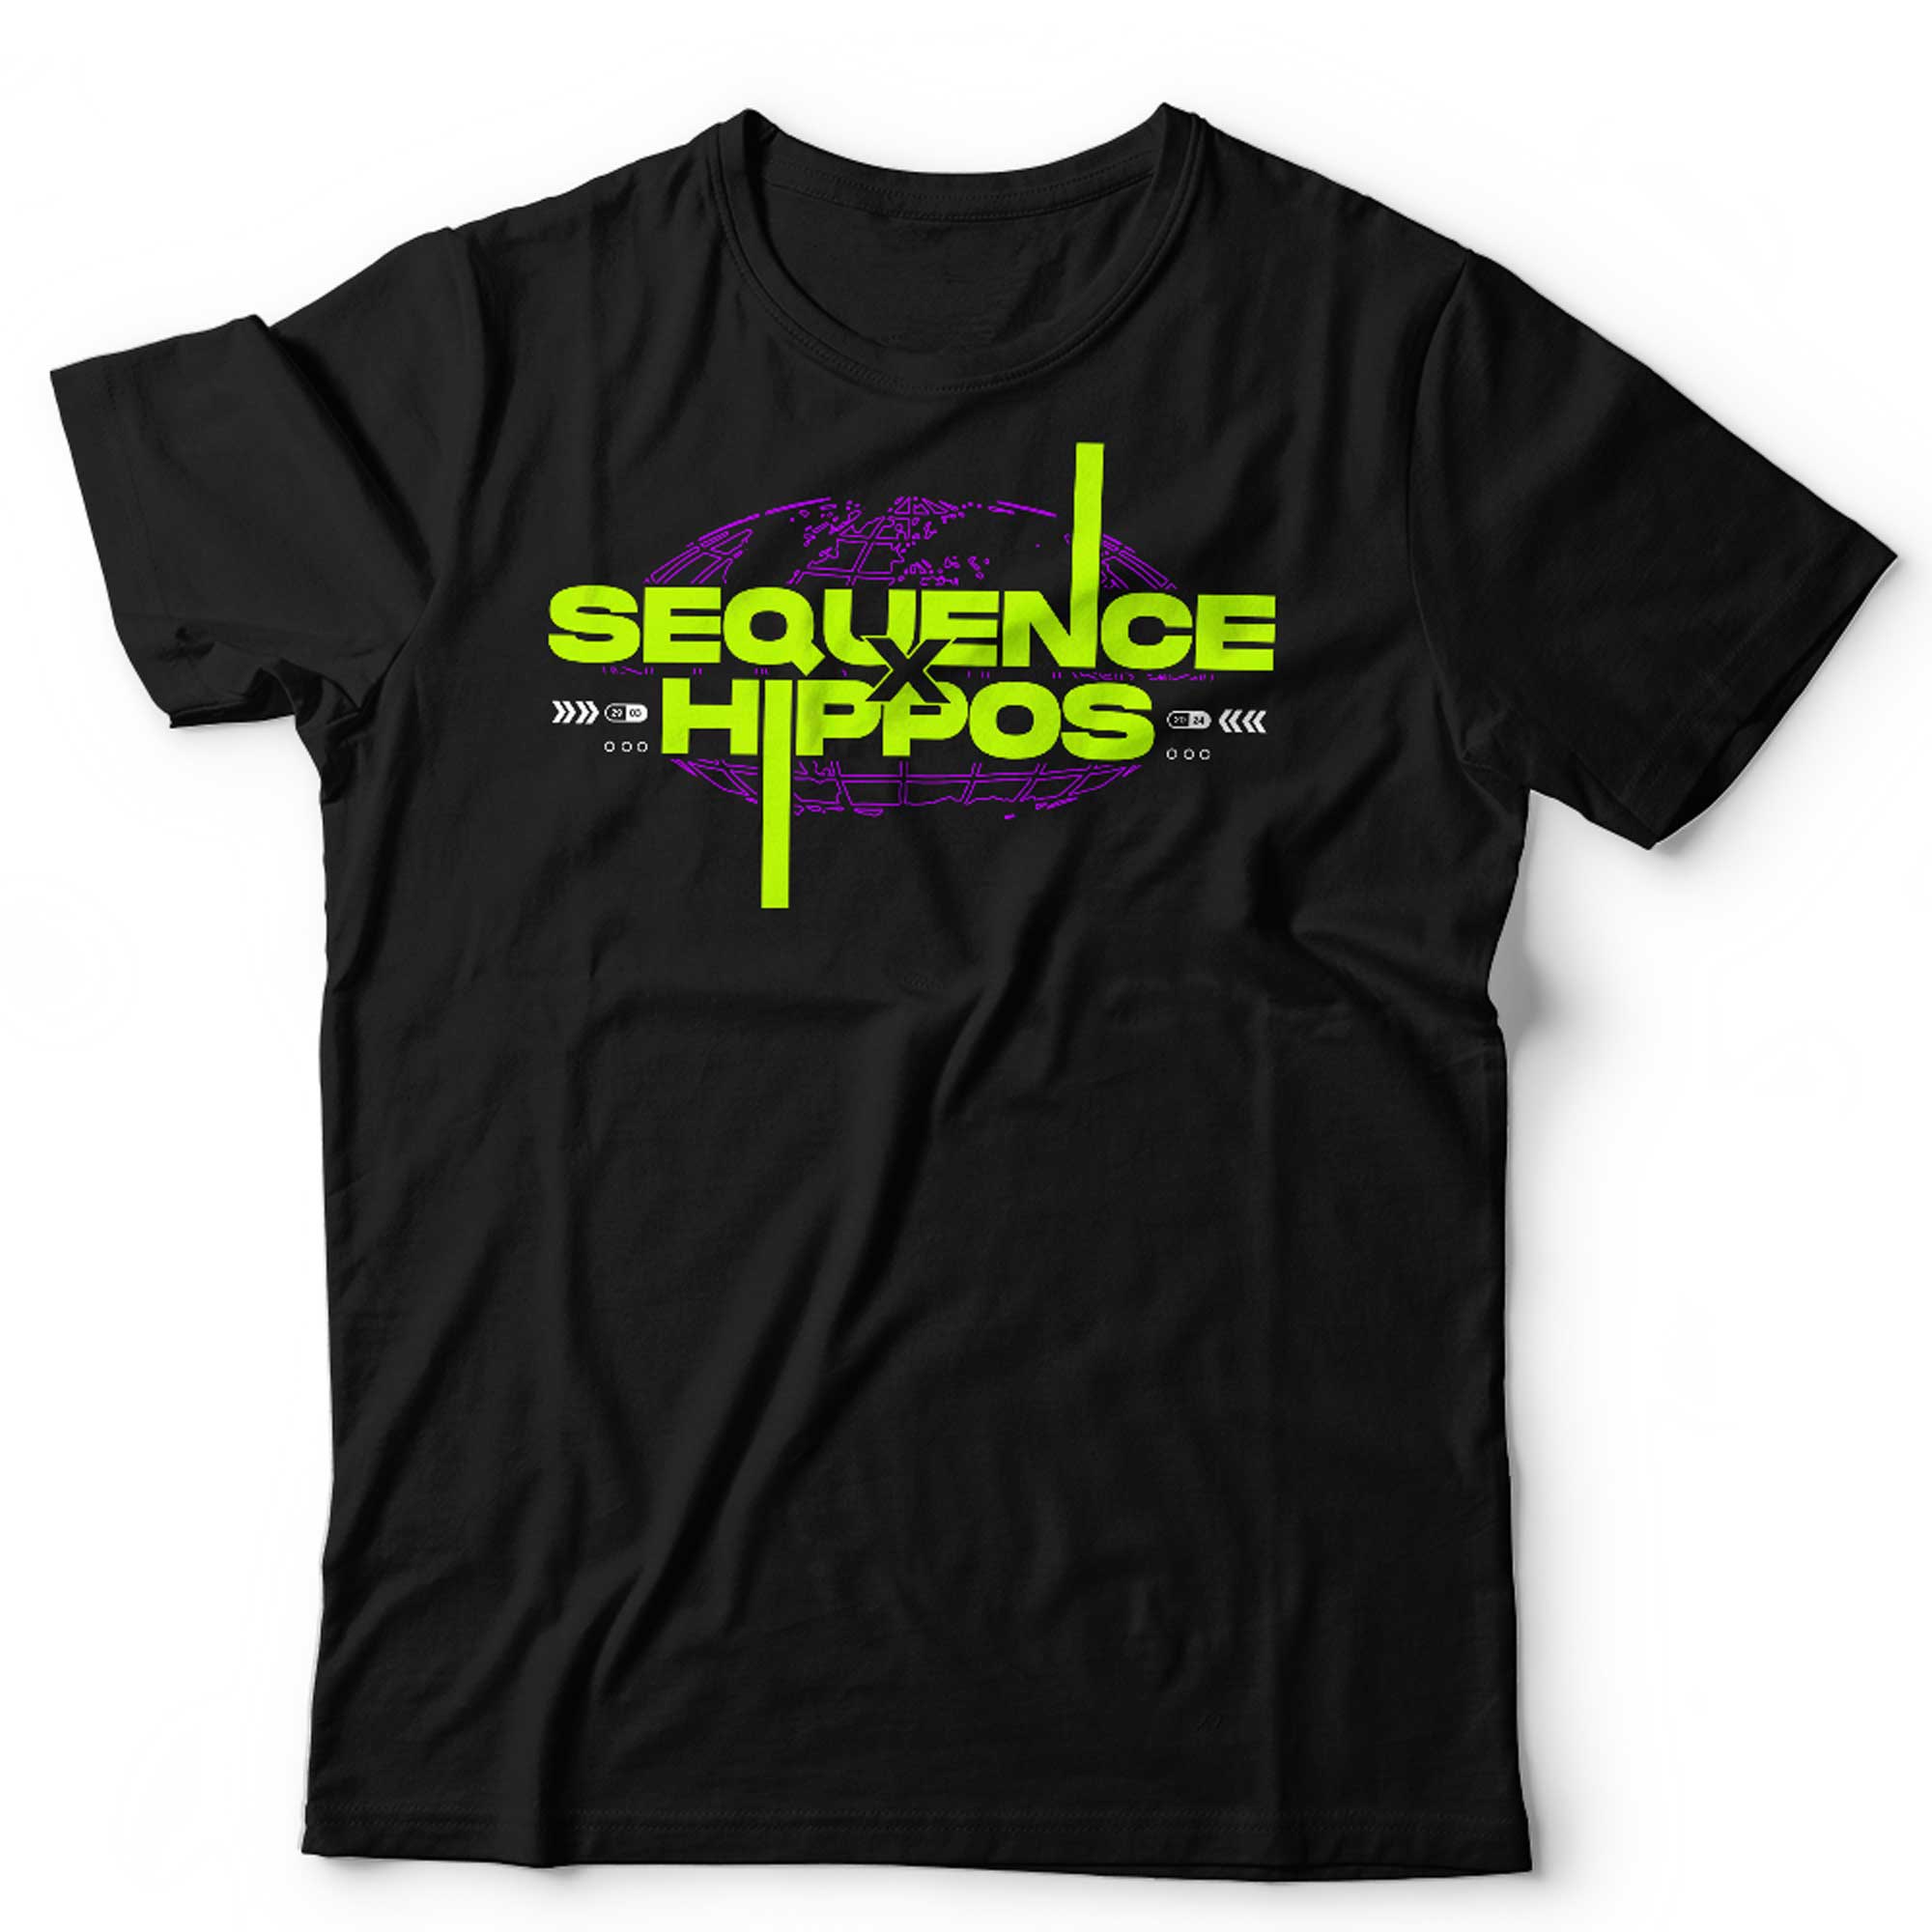 Sequence x Hippos Front & Back Unisex T Shirt